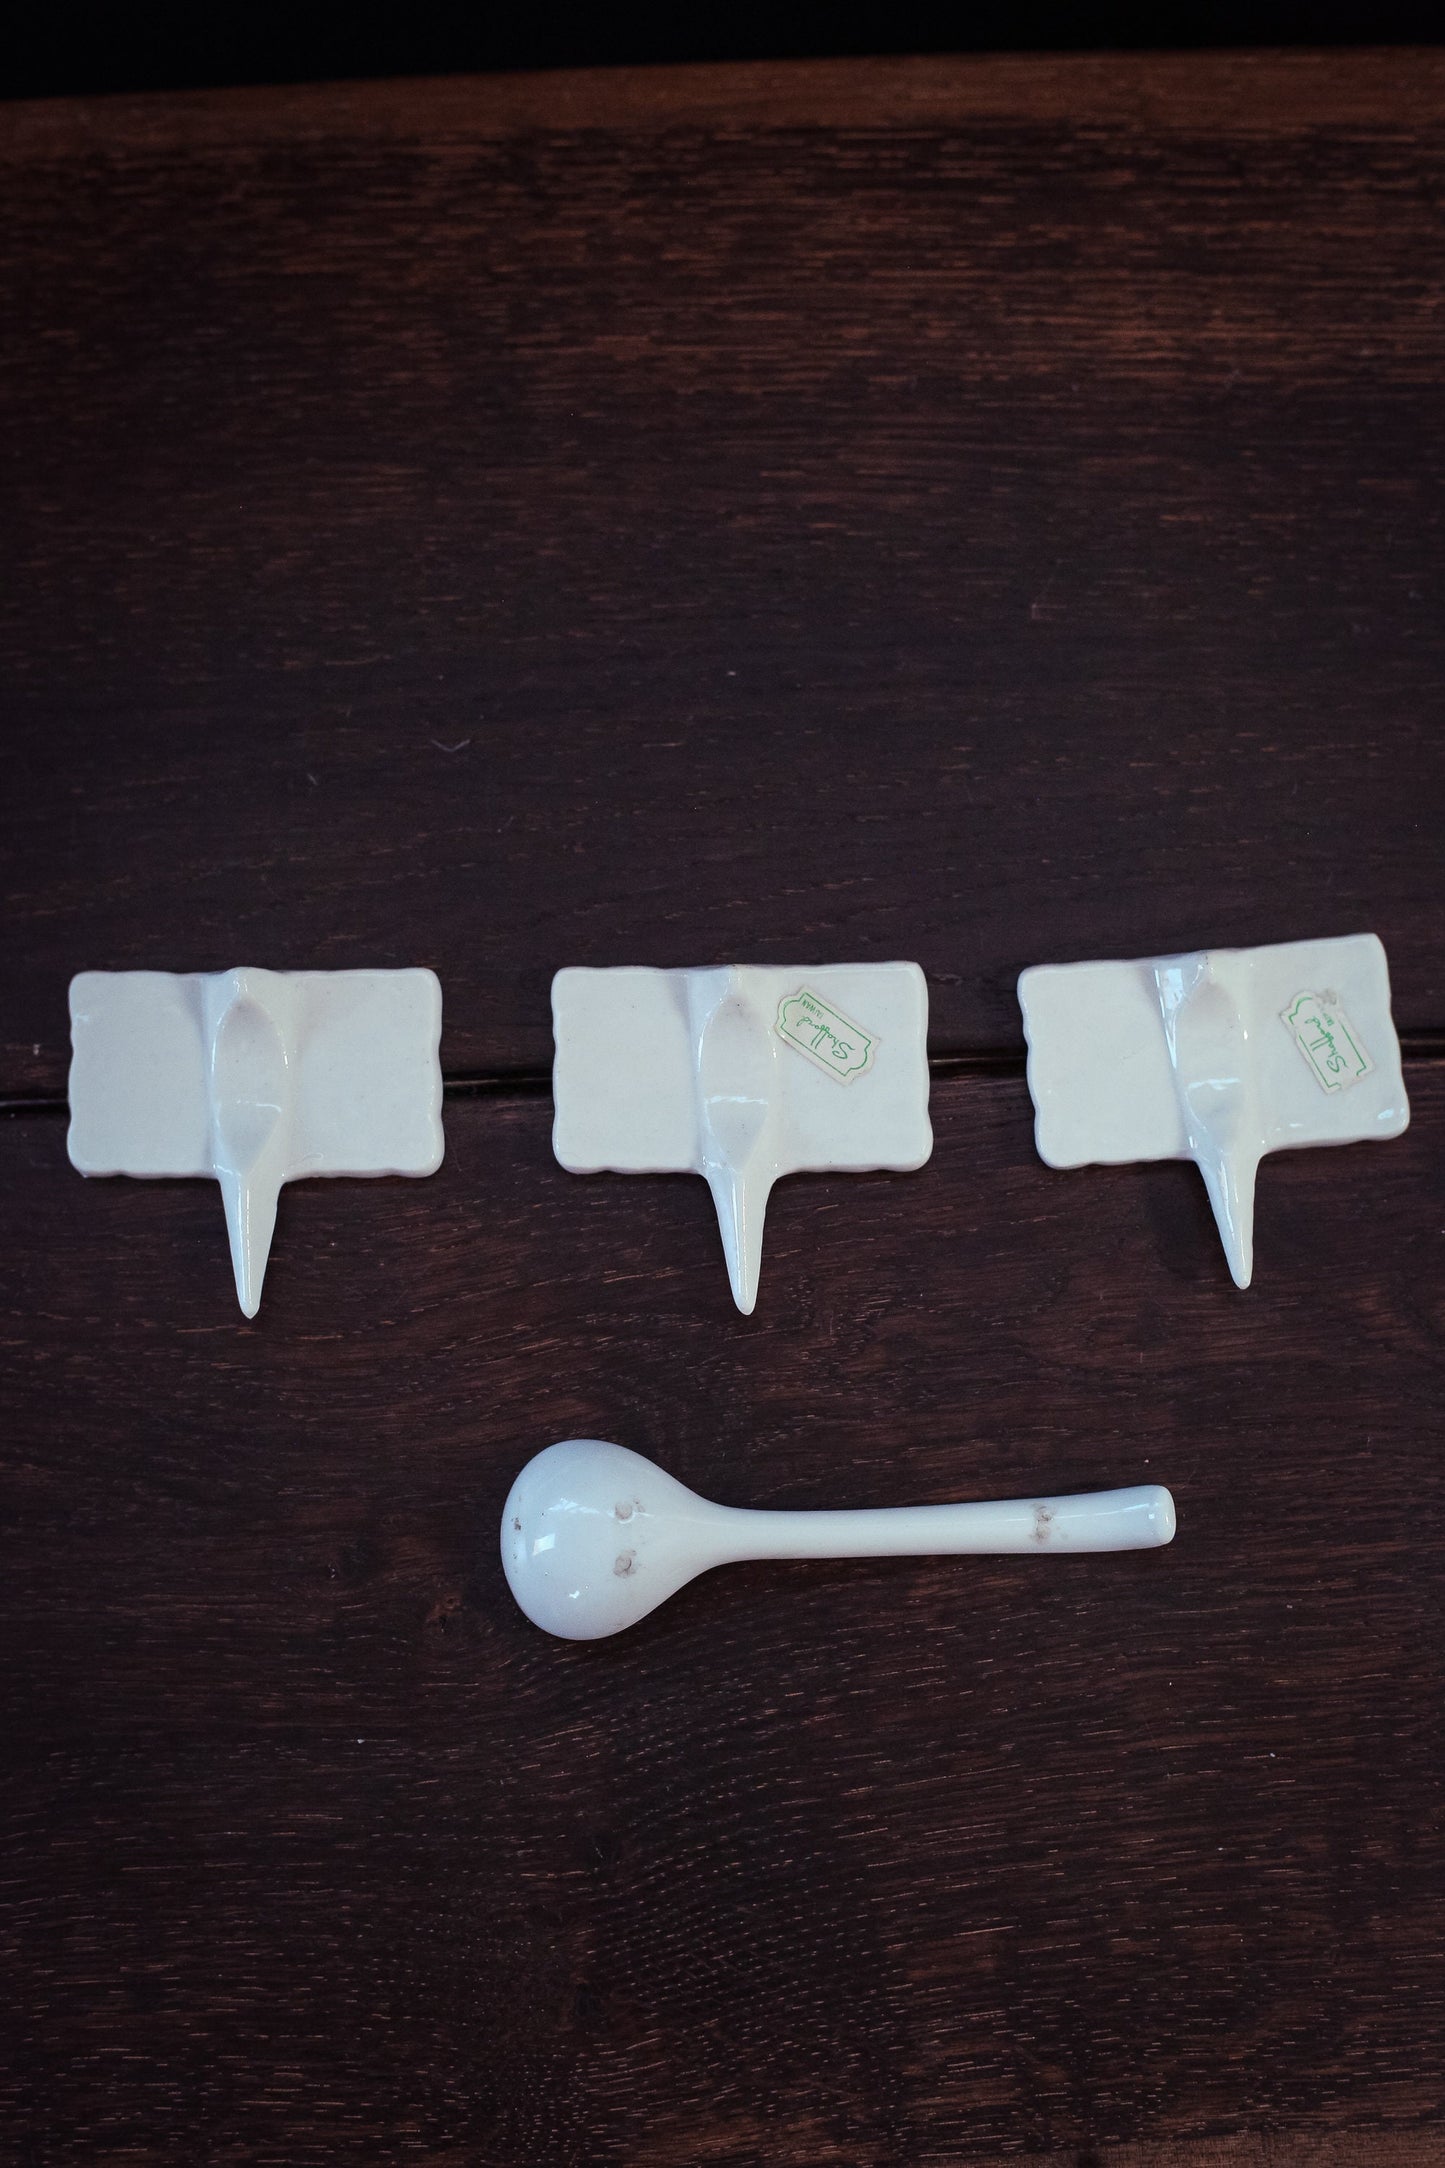 White Porcelain Cheese Markers & Spoon - Vintage Porcelain Cheeseboard Accessories